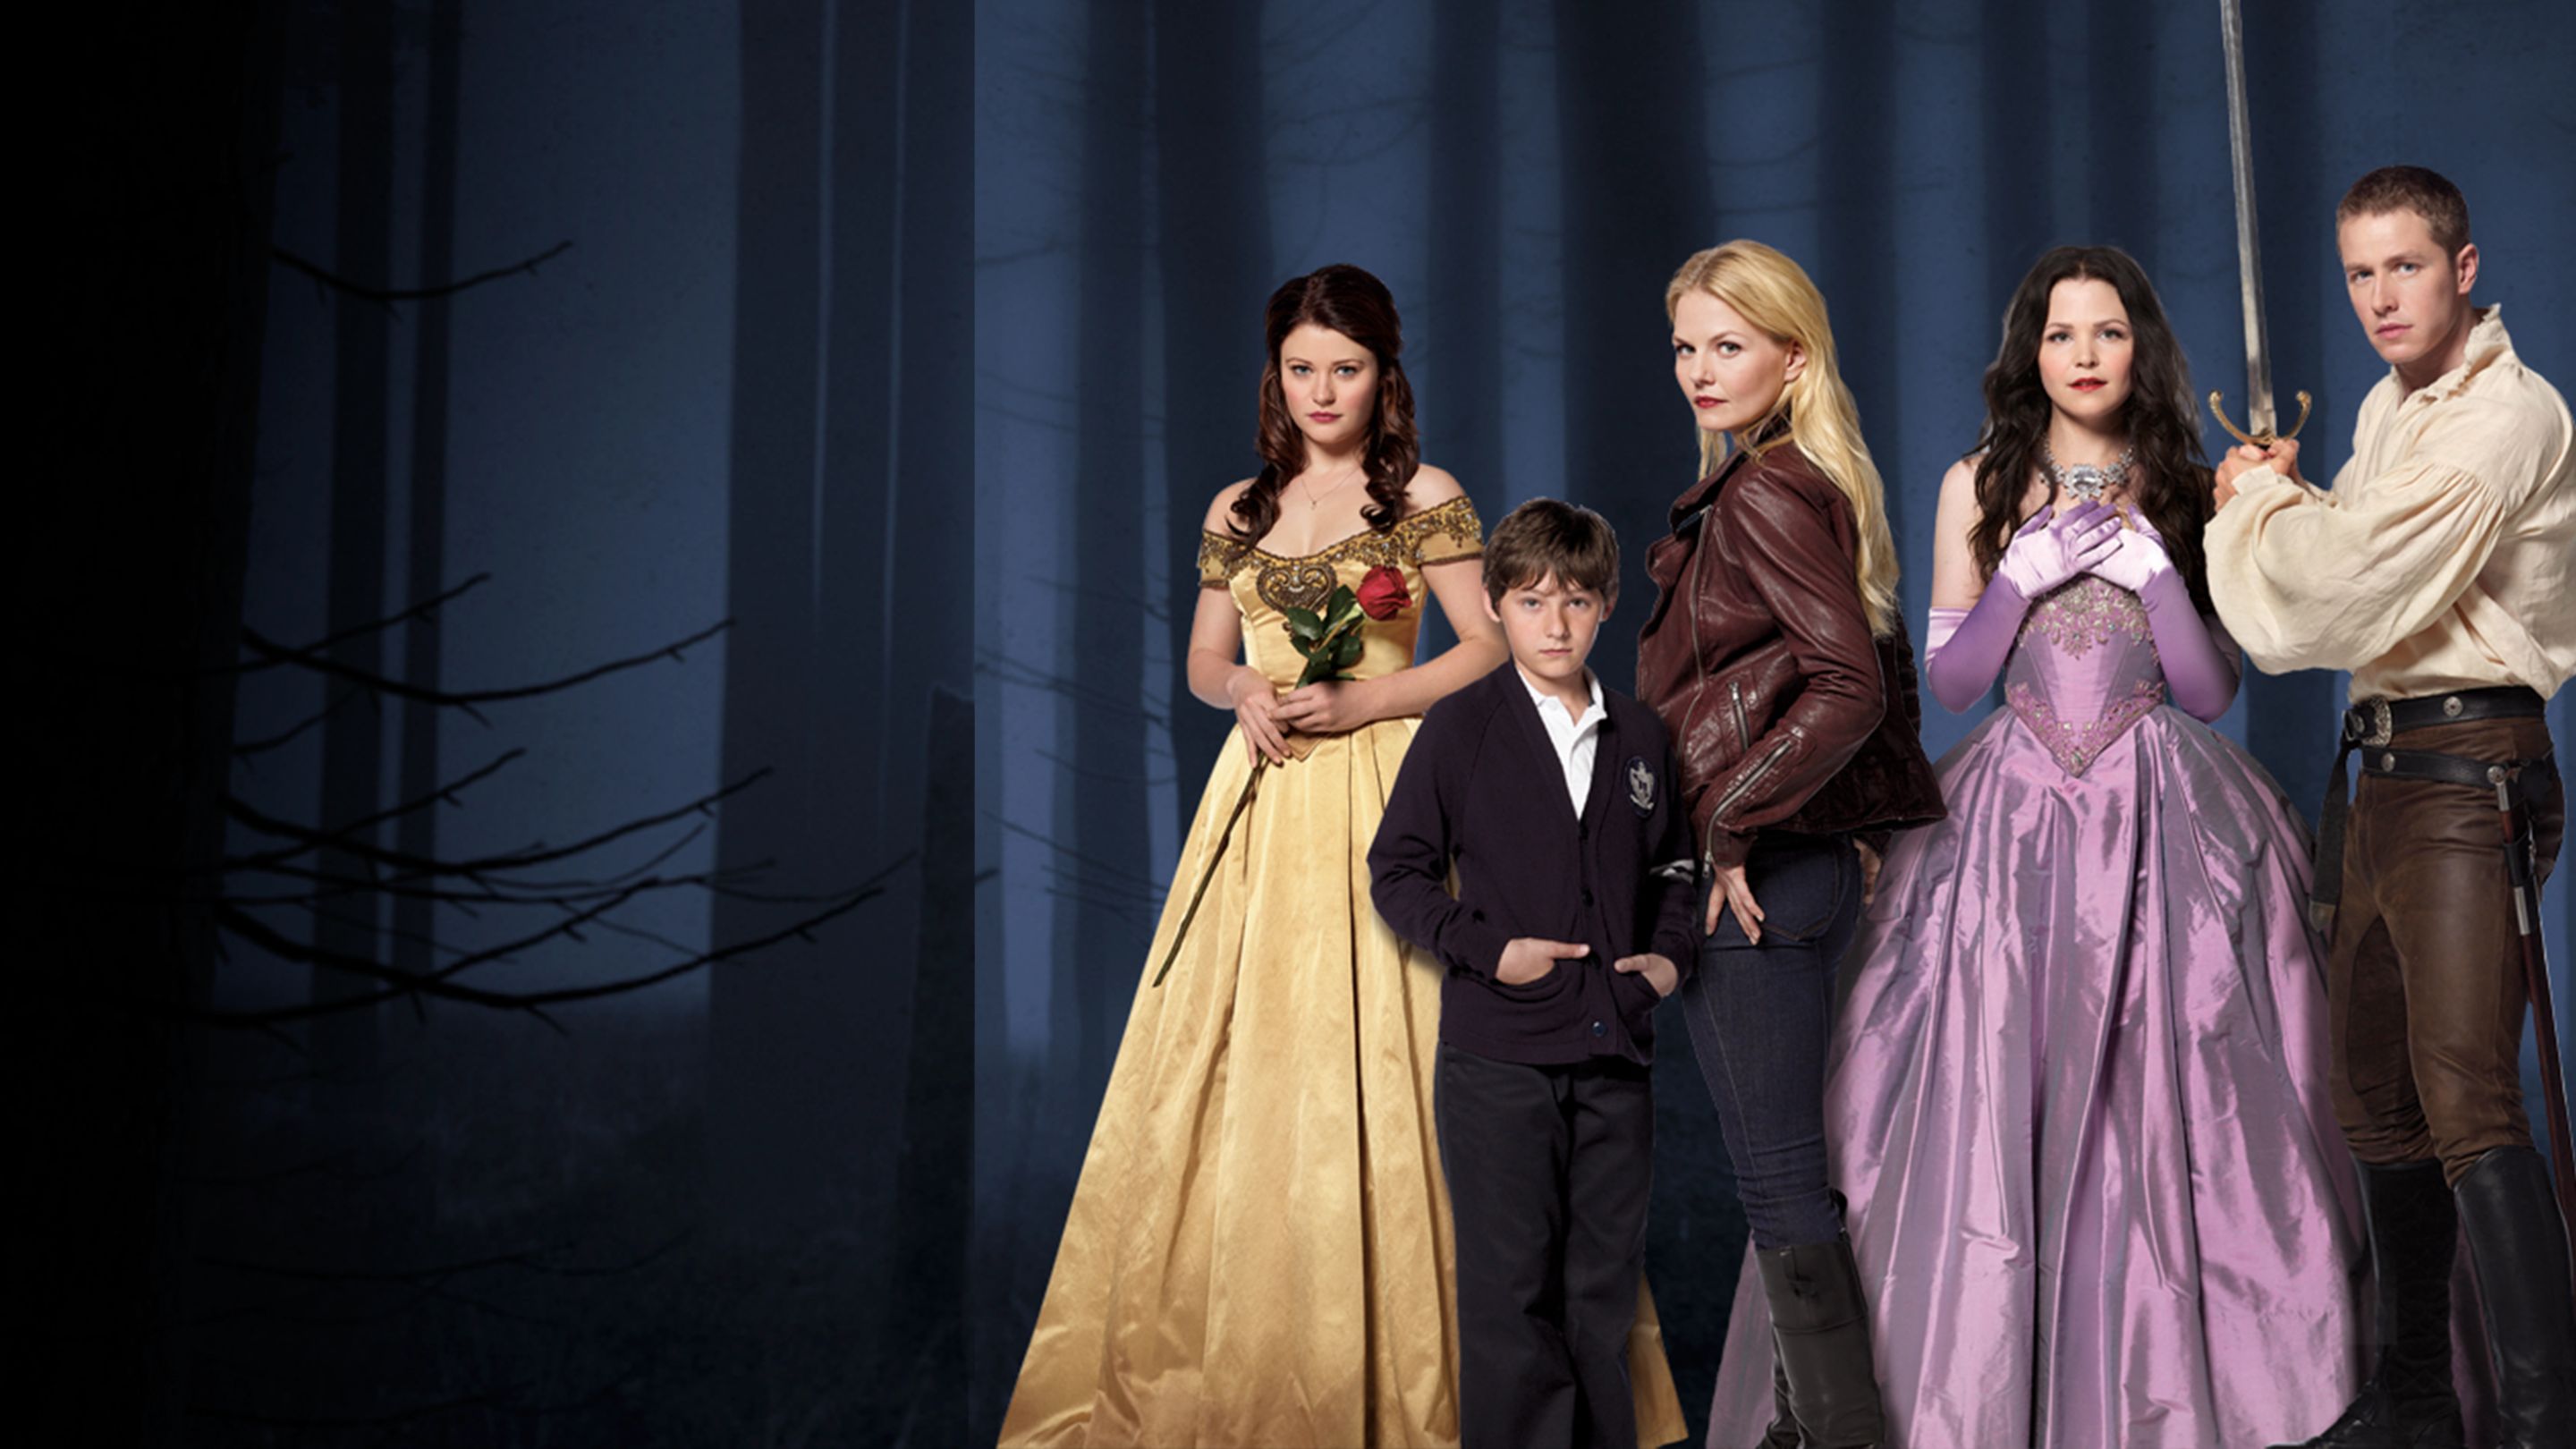 Watch Once Upon a Time Streaming Online